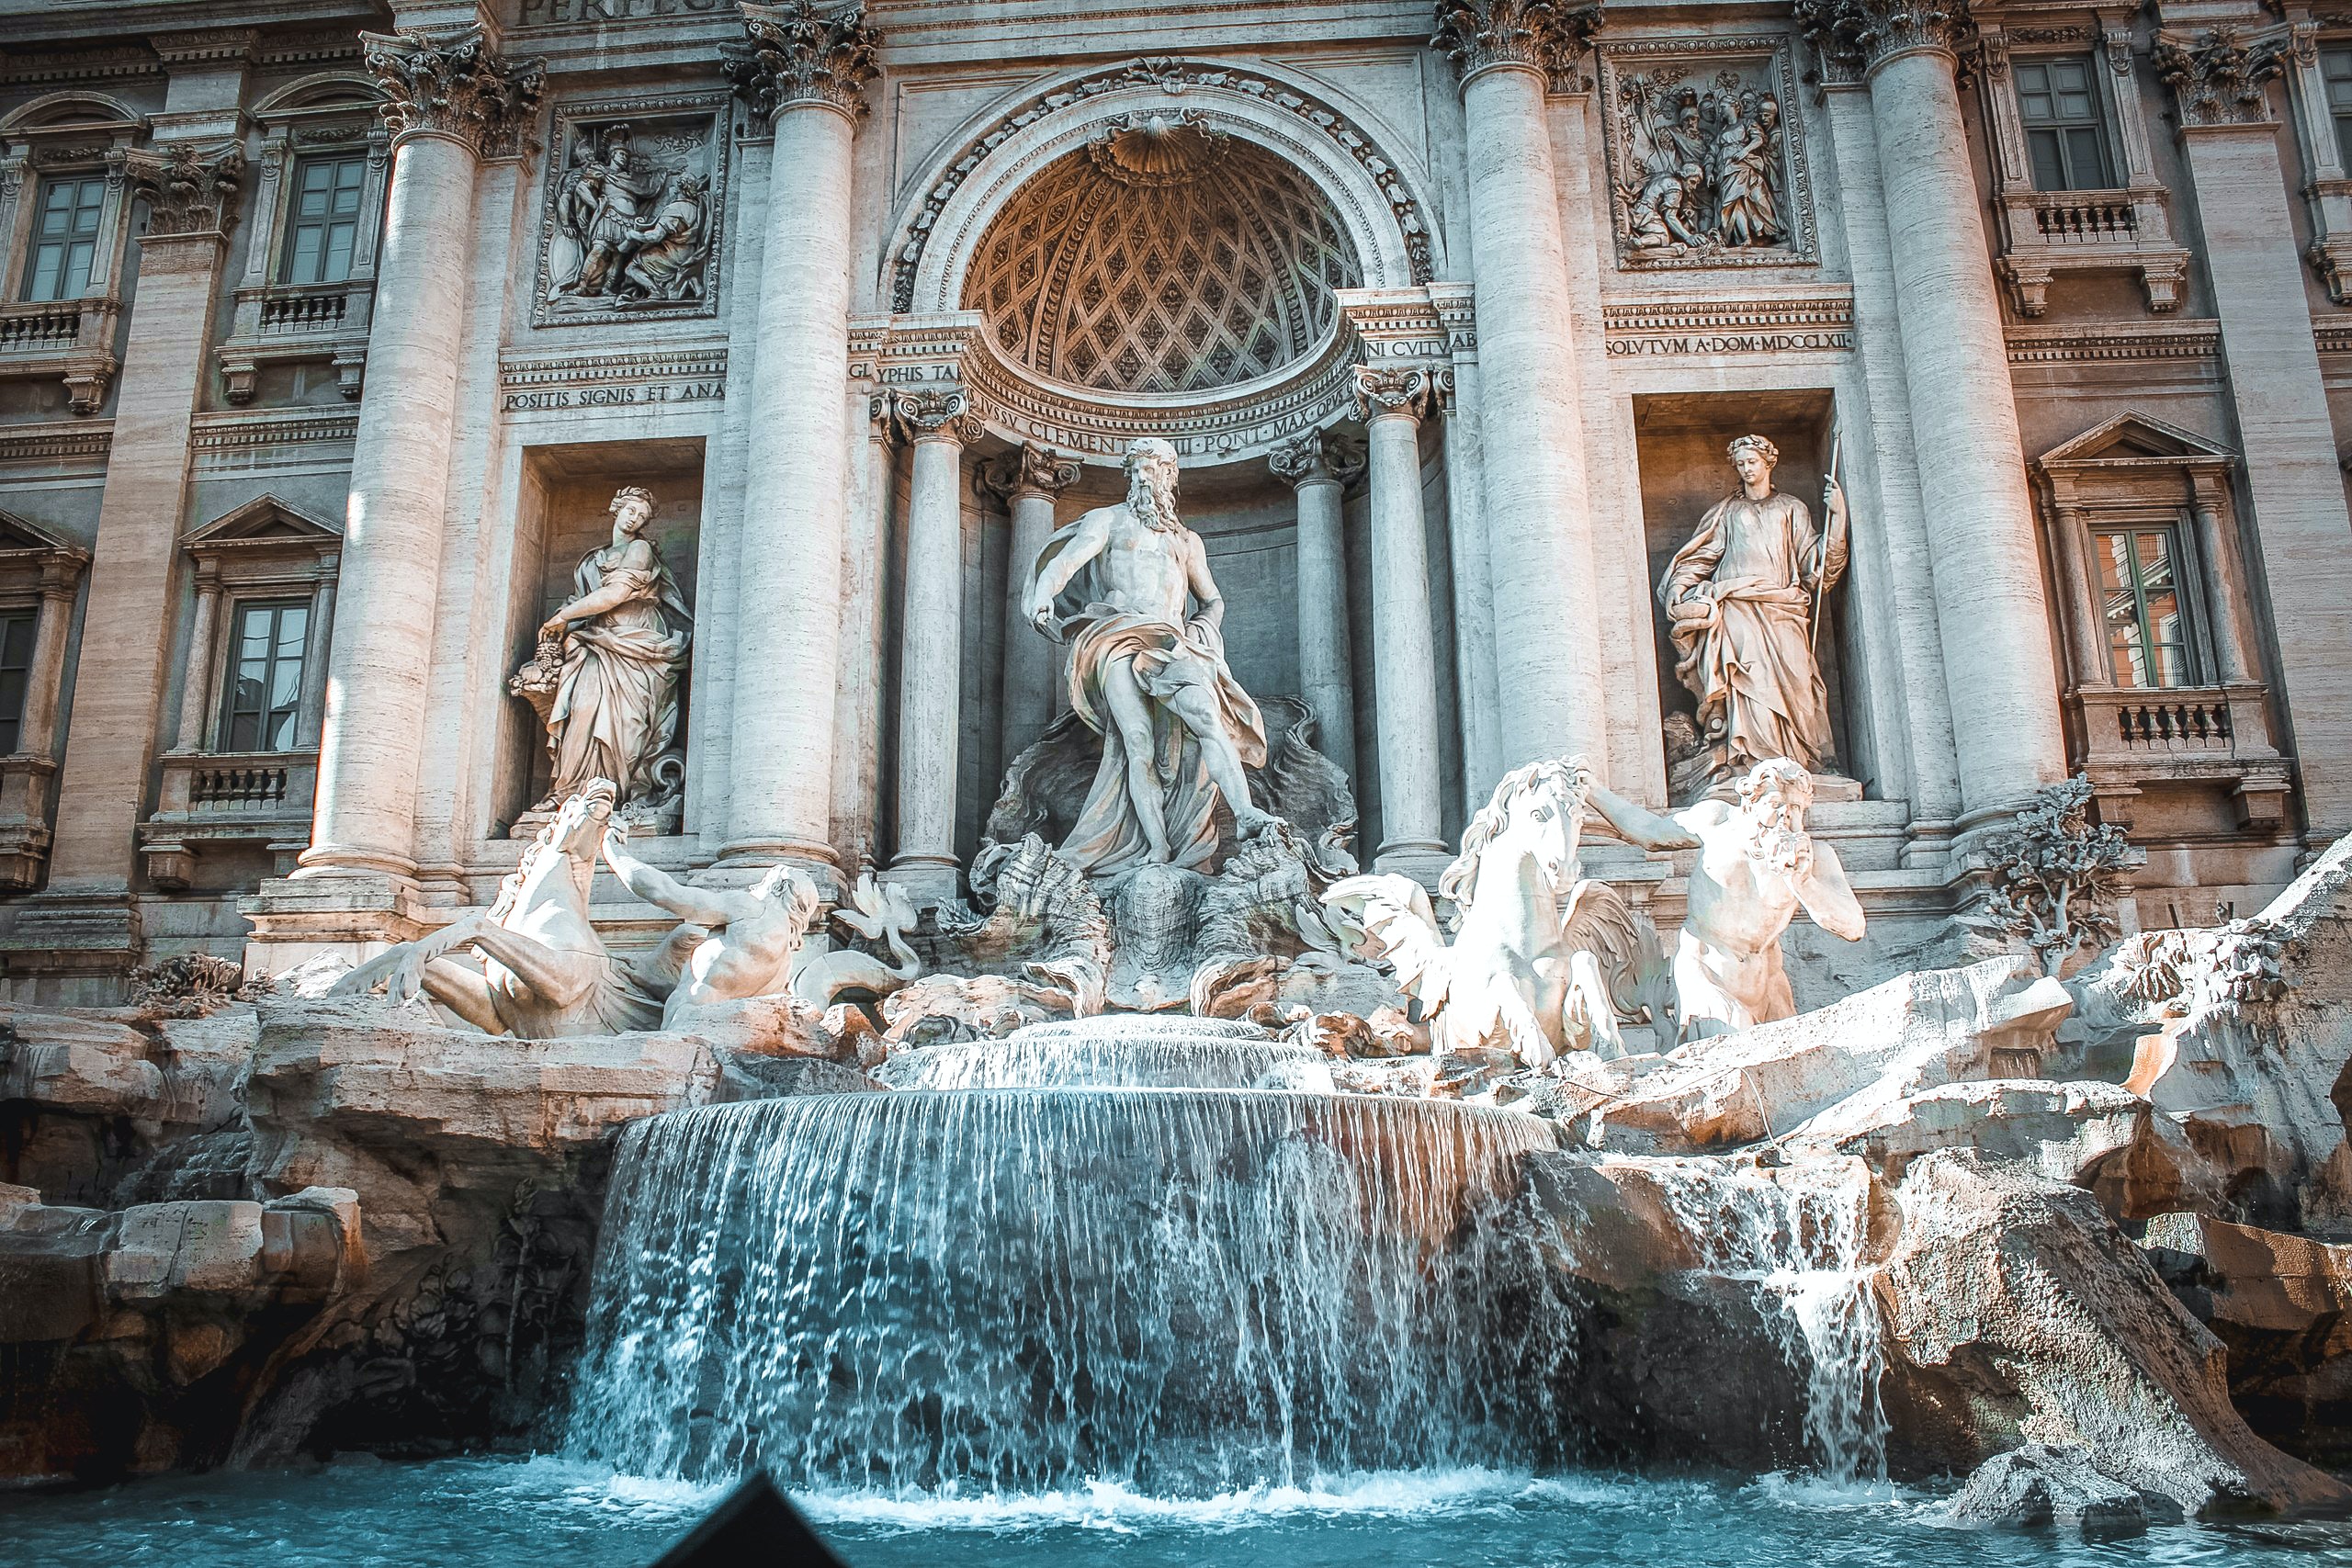 Fontana di Trevi<br>Source: [Pexels](https://www.pexels.com/photo/sculptures-on-a-water-fountain-in-front-of-a-building-7355954/)